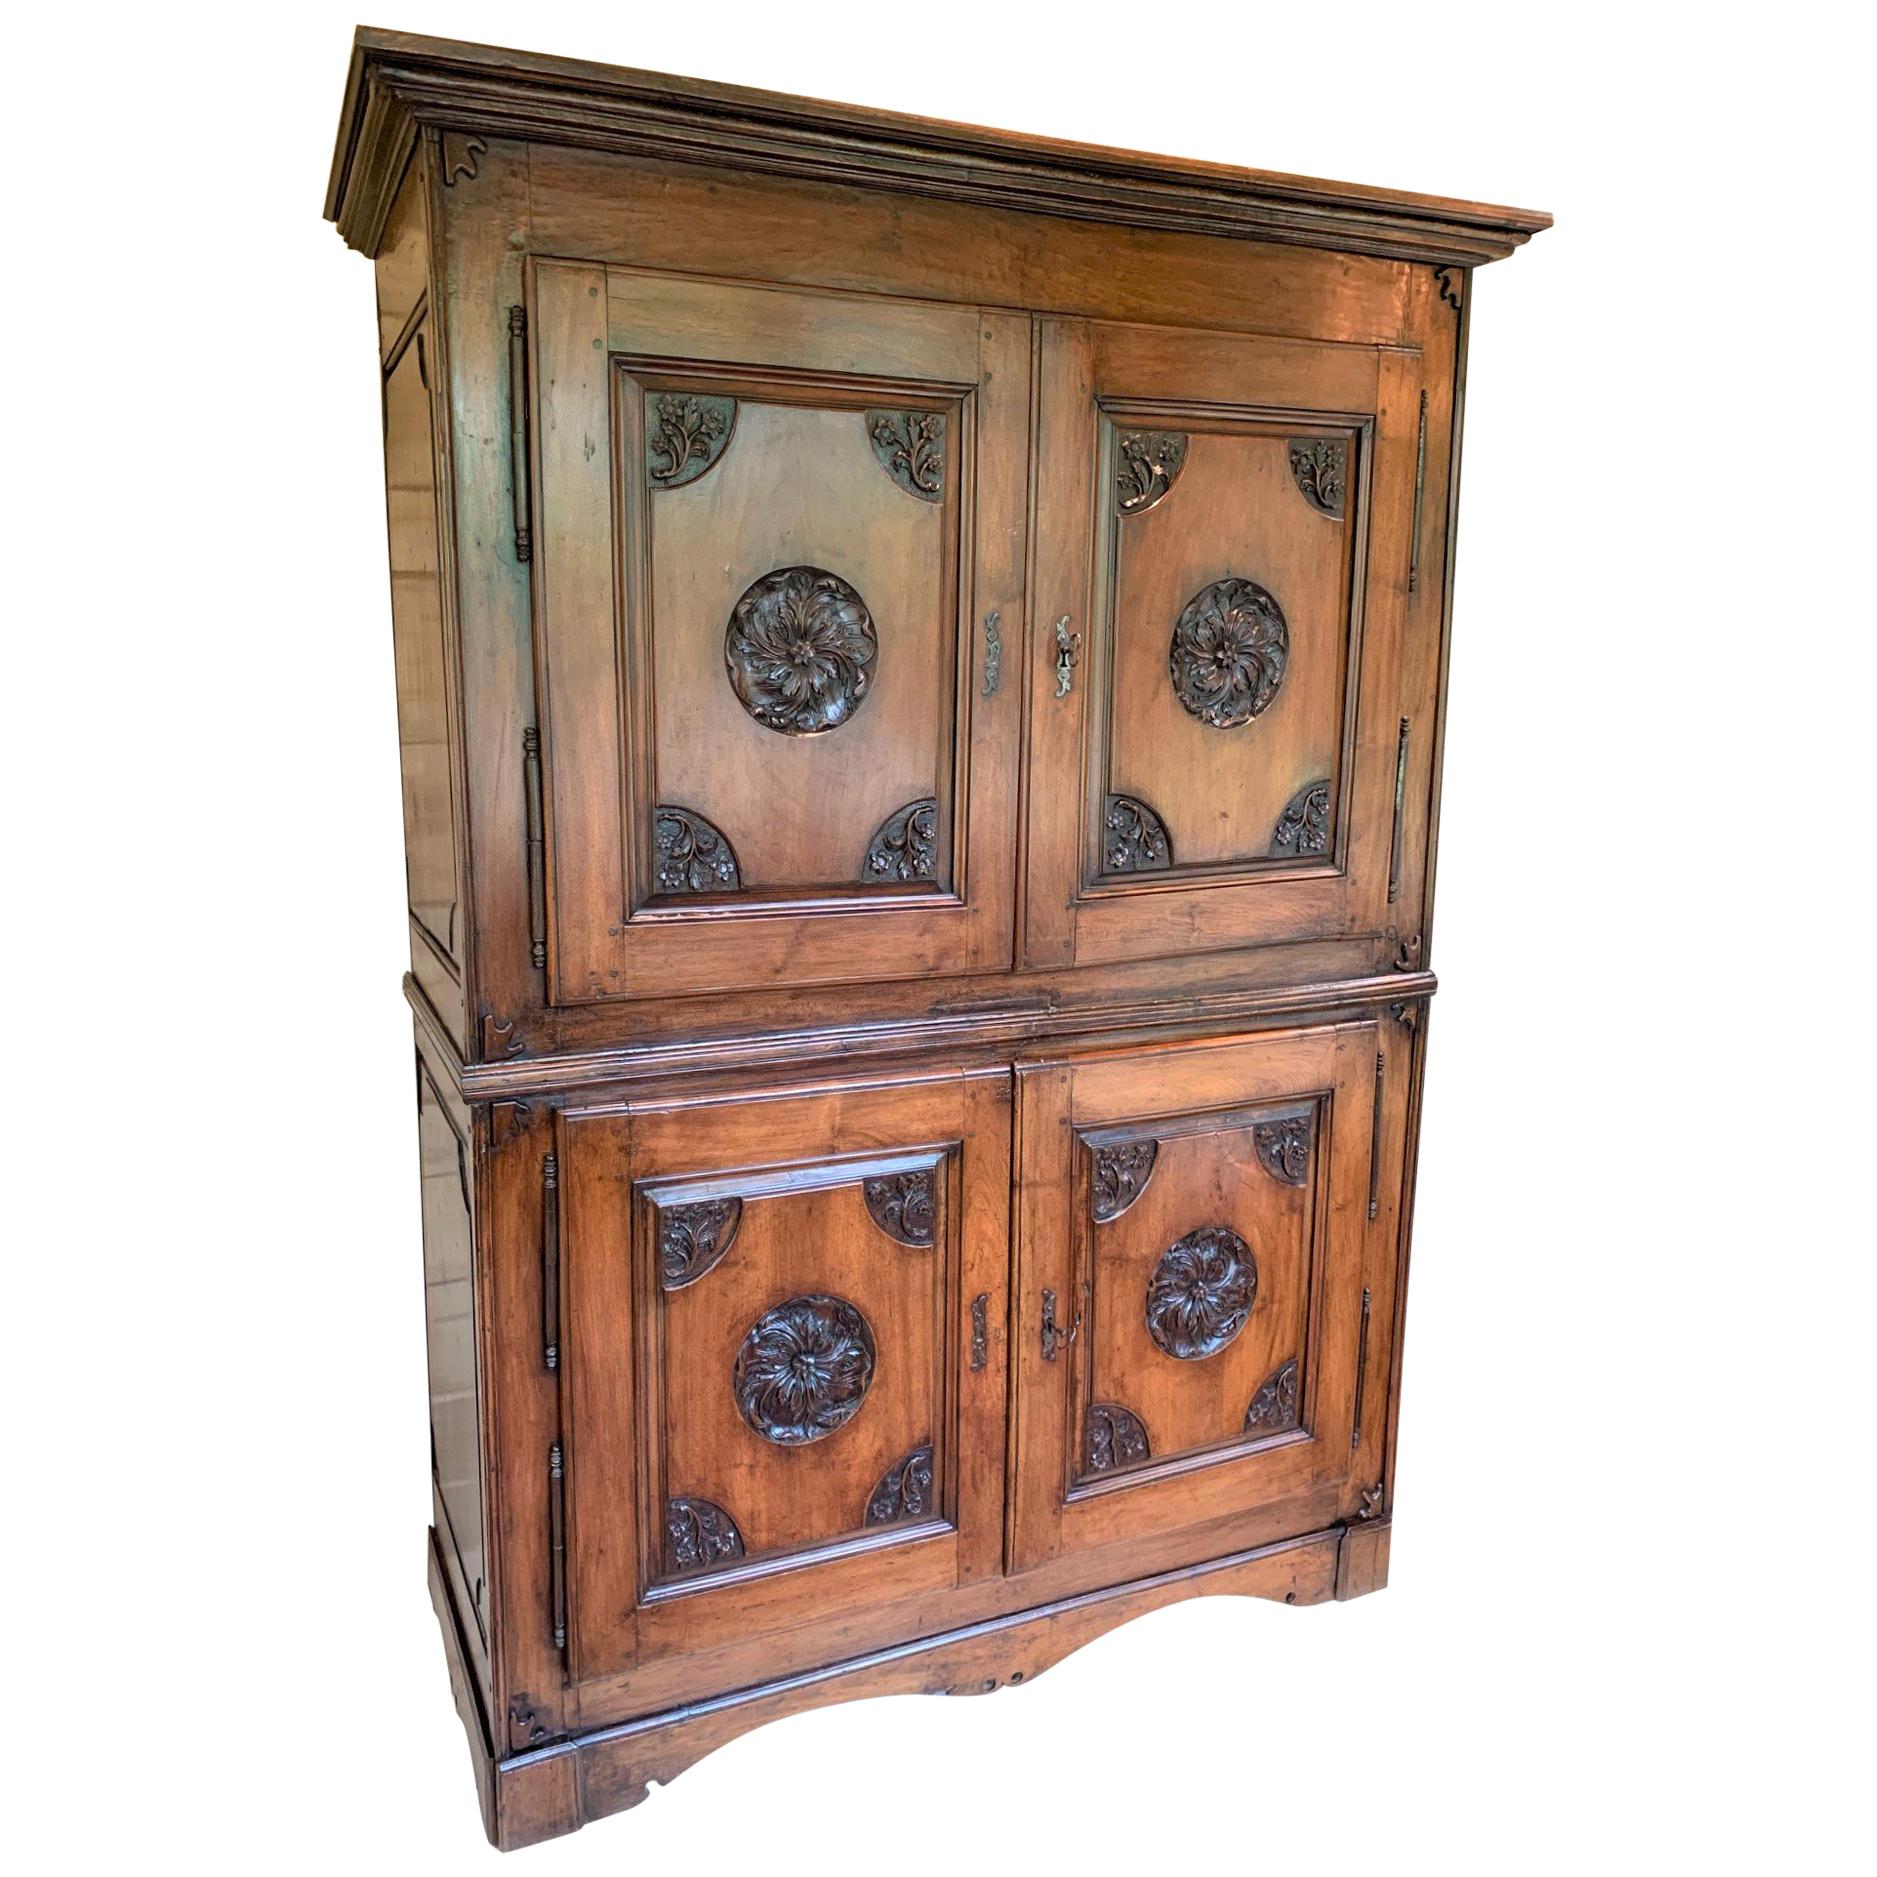 18th Century French Red Walnut Armoire